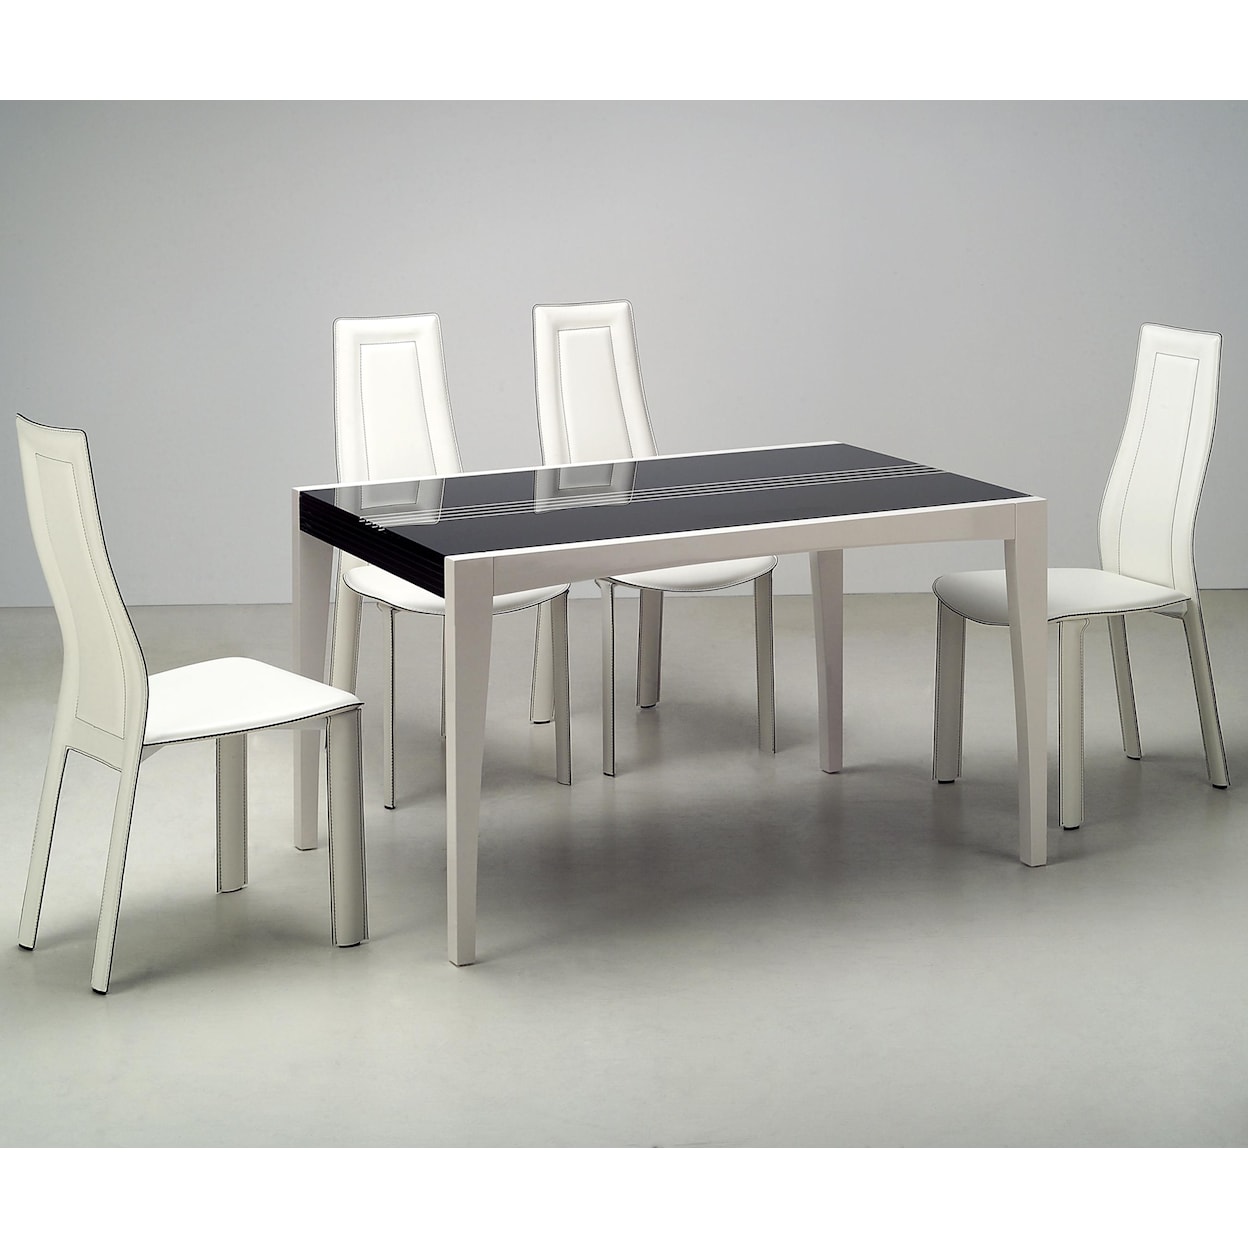 Chintaly Imports Doreen 5 Piece Dining Set